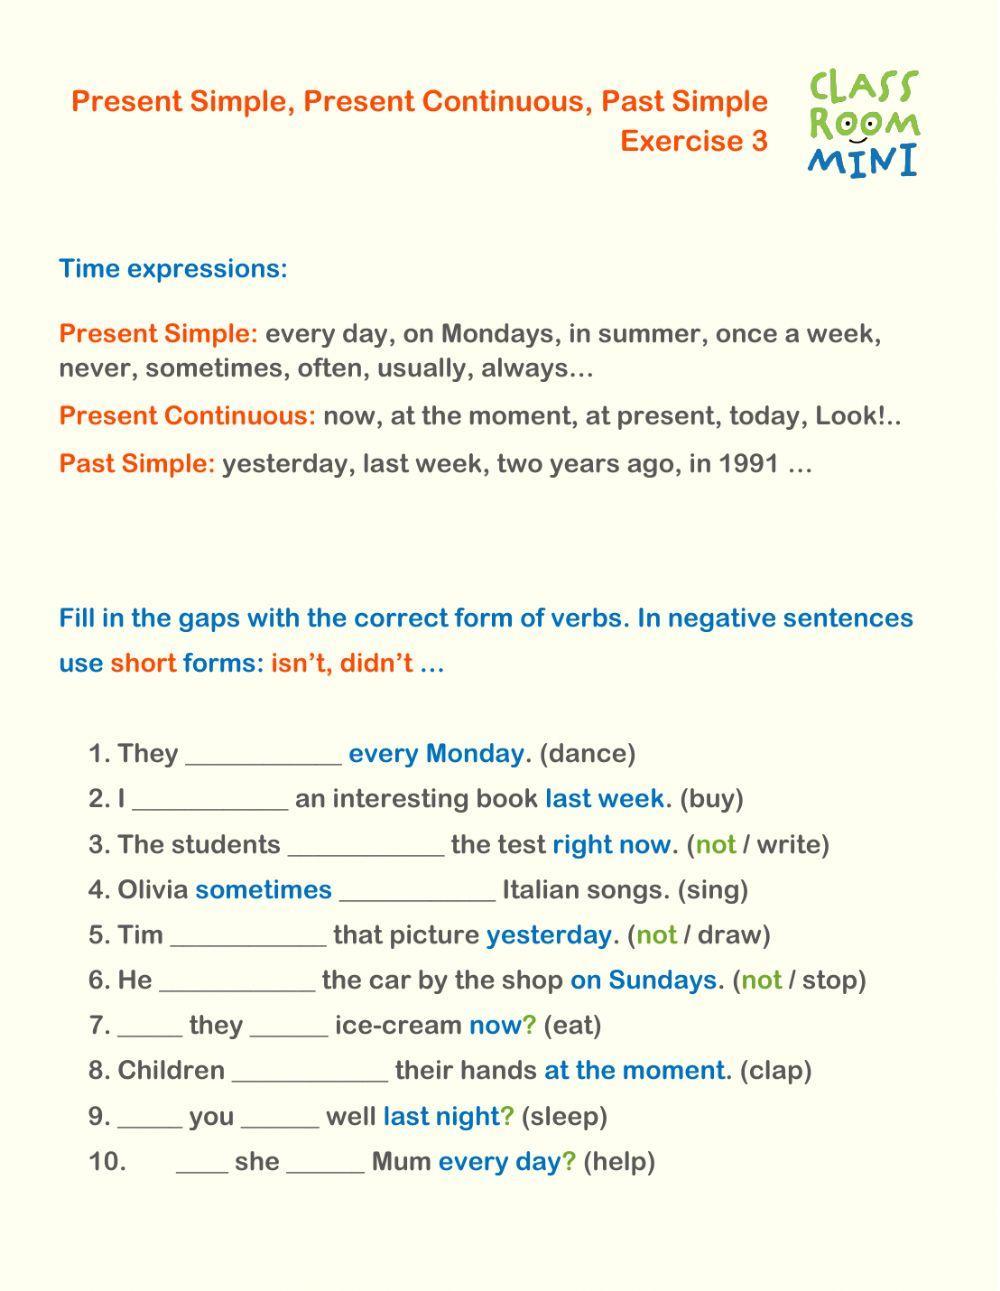 Present Simple, Present Continuous, Past Simple. Exercise 3